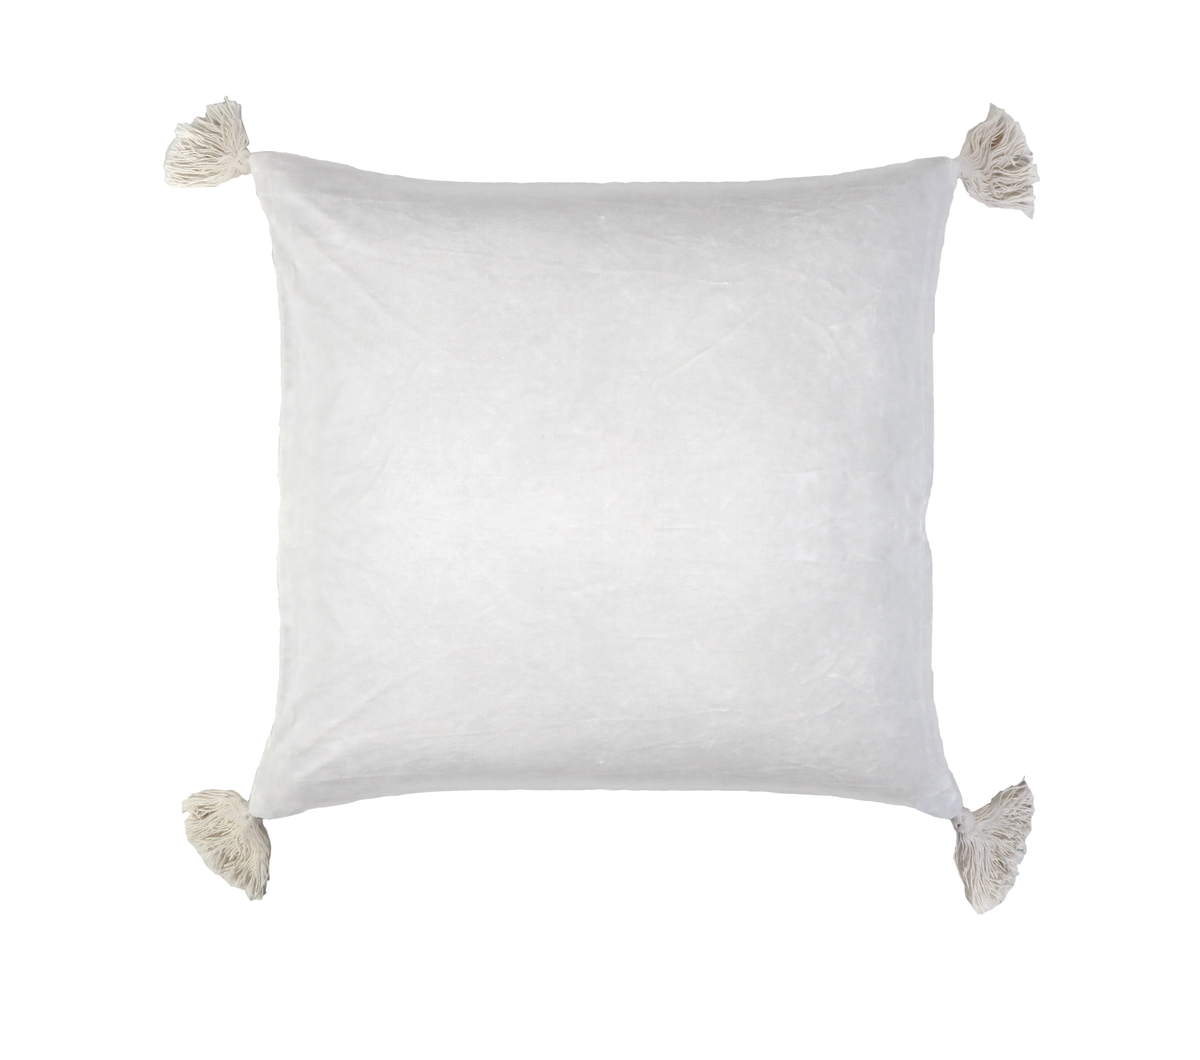 Bianca 20"x20" Pillow with Insert - White Color - Pom pom At Home